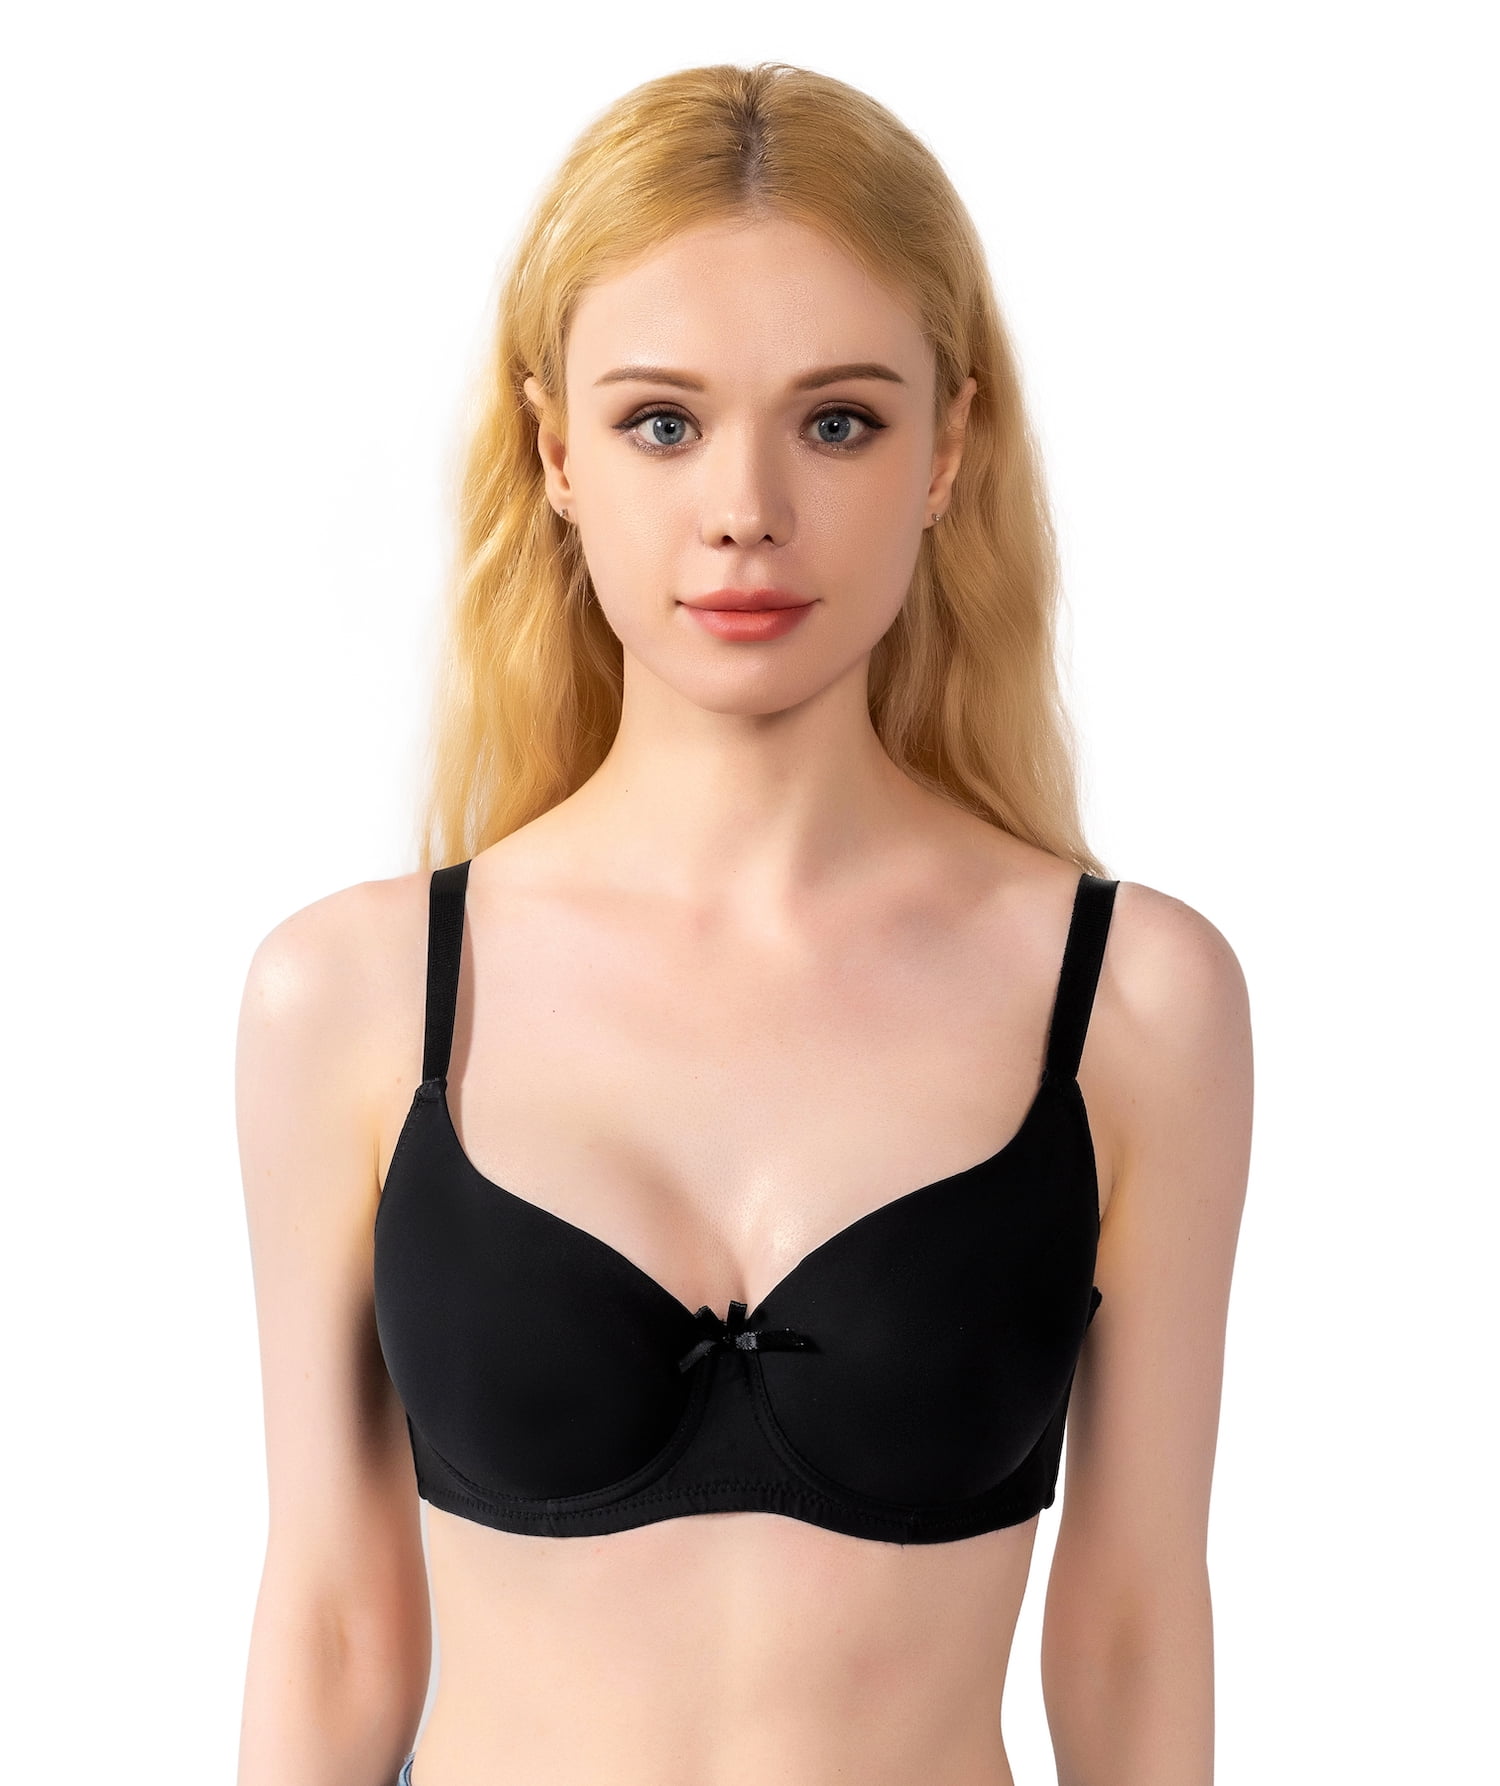 Women Bras 6 pack of T-shirt Bra B cup C cup D cup DD cup DDD cup Size 38B  (F9290)